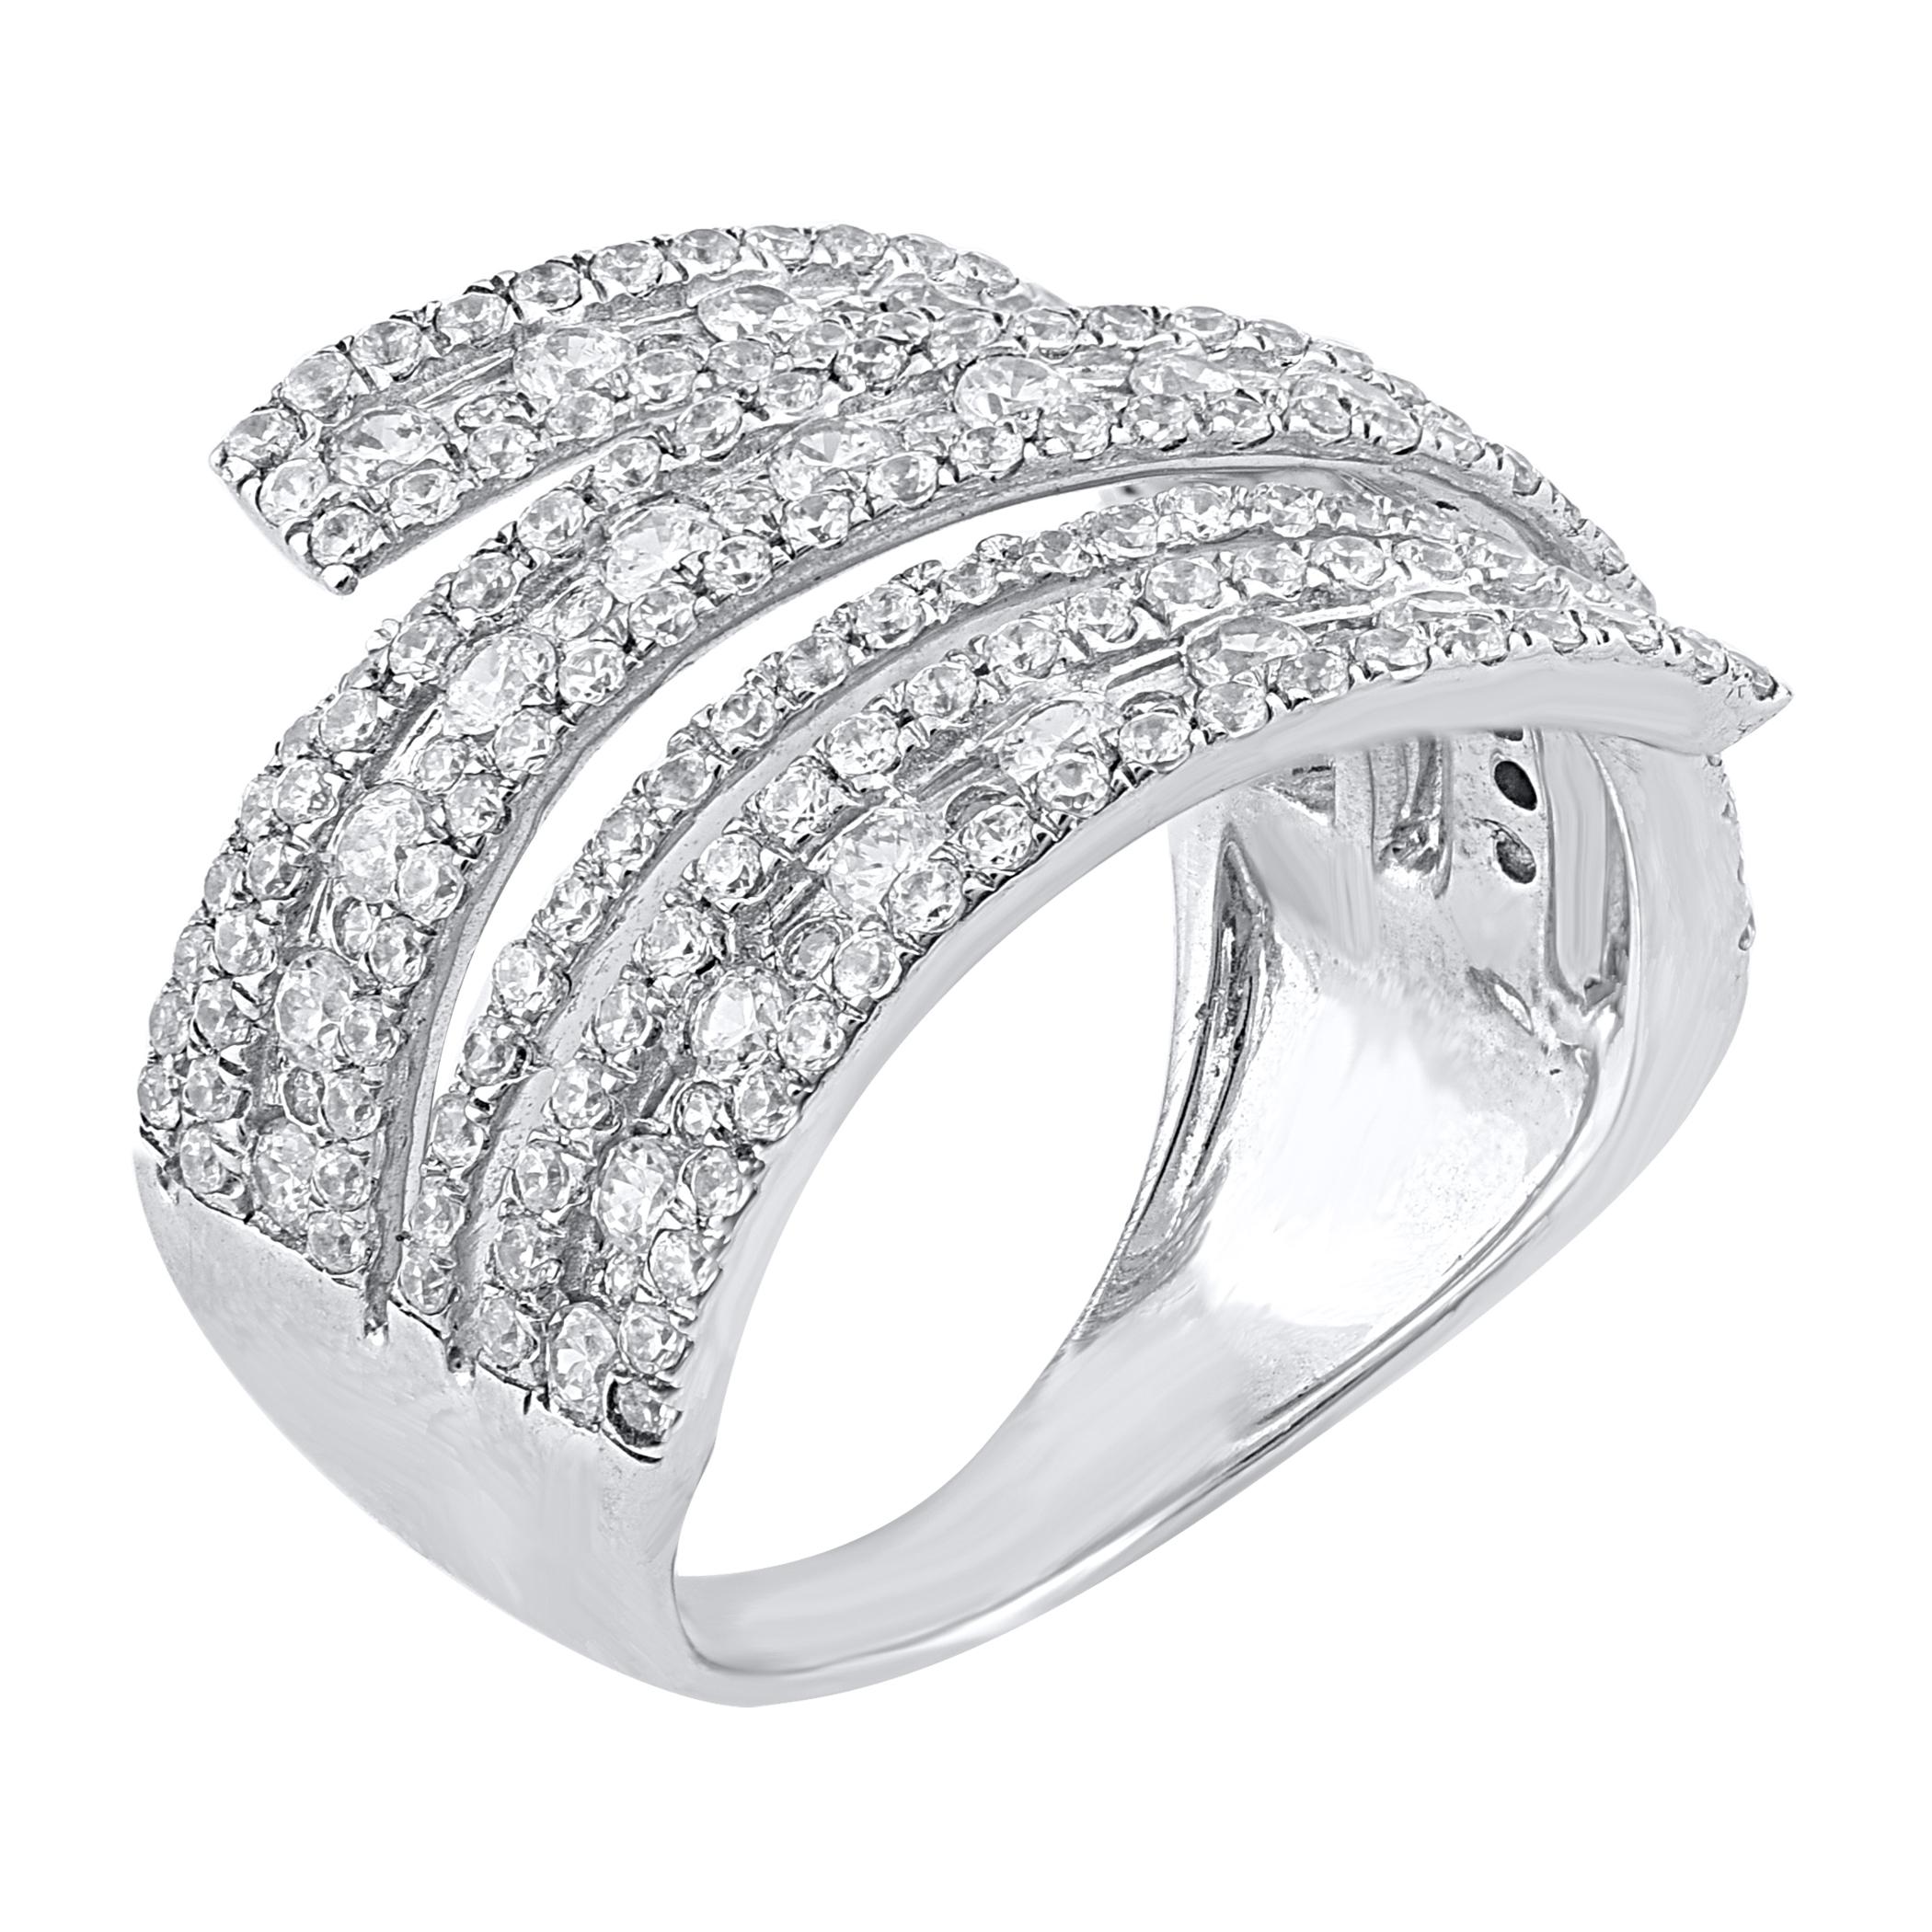 A meaningful symbol of your never ending commitment. This ring is beautifully designed in 14 karat white gold and studded with 293 brilliant cut and single cut round diamond in prong and channel setting. The white diamonds are graded as H-I color